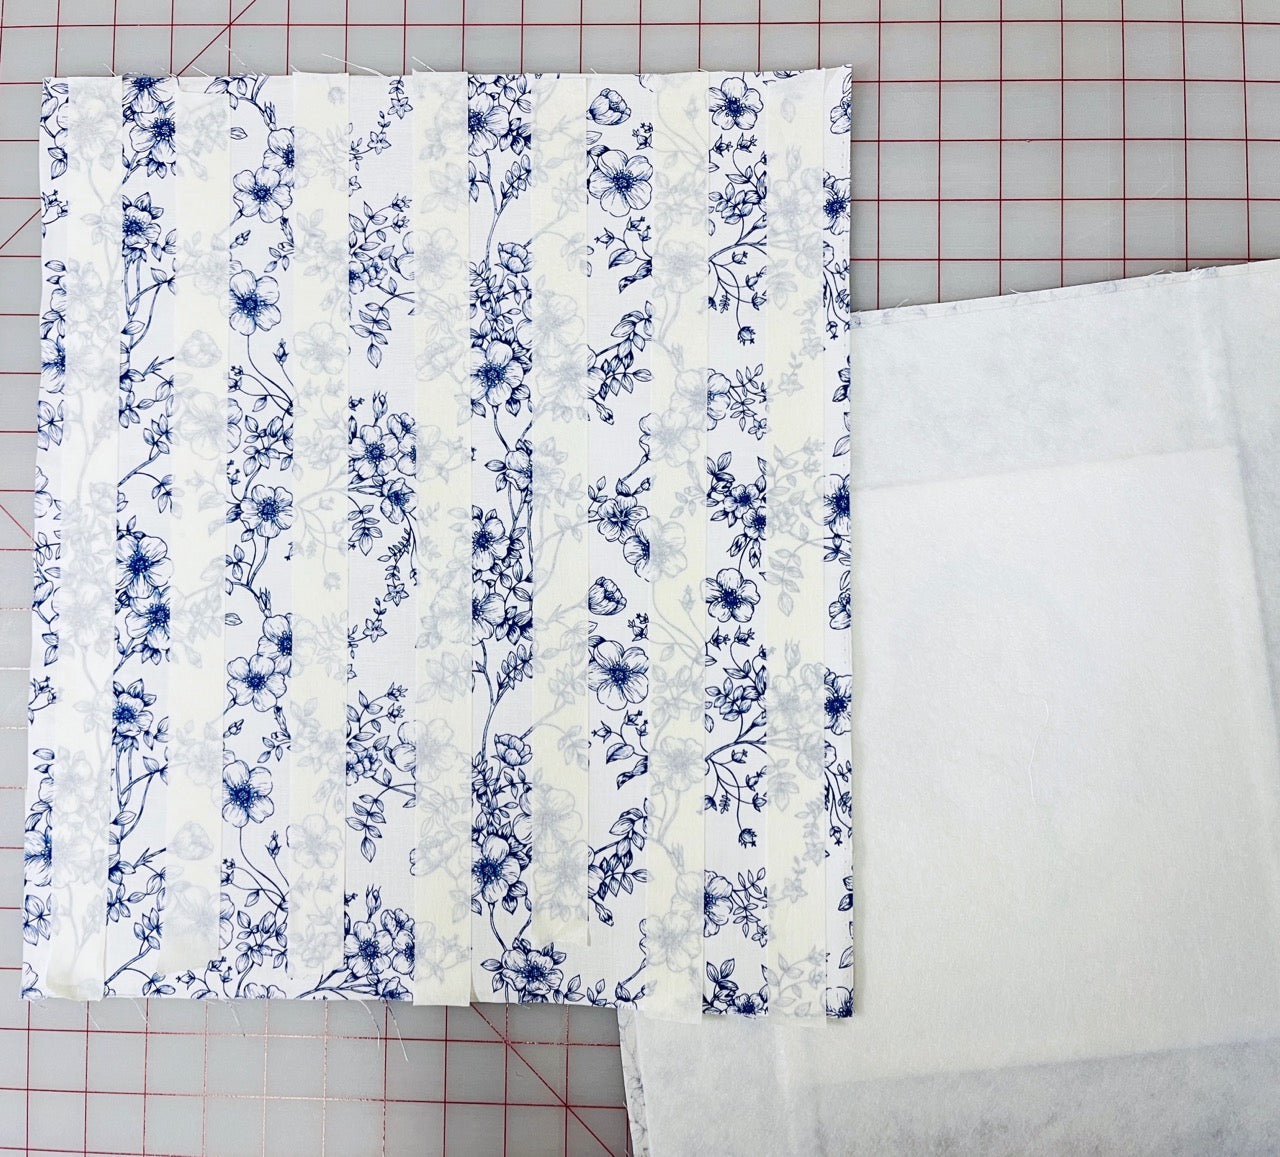 sewing quilt lines with masking tape